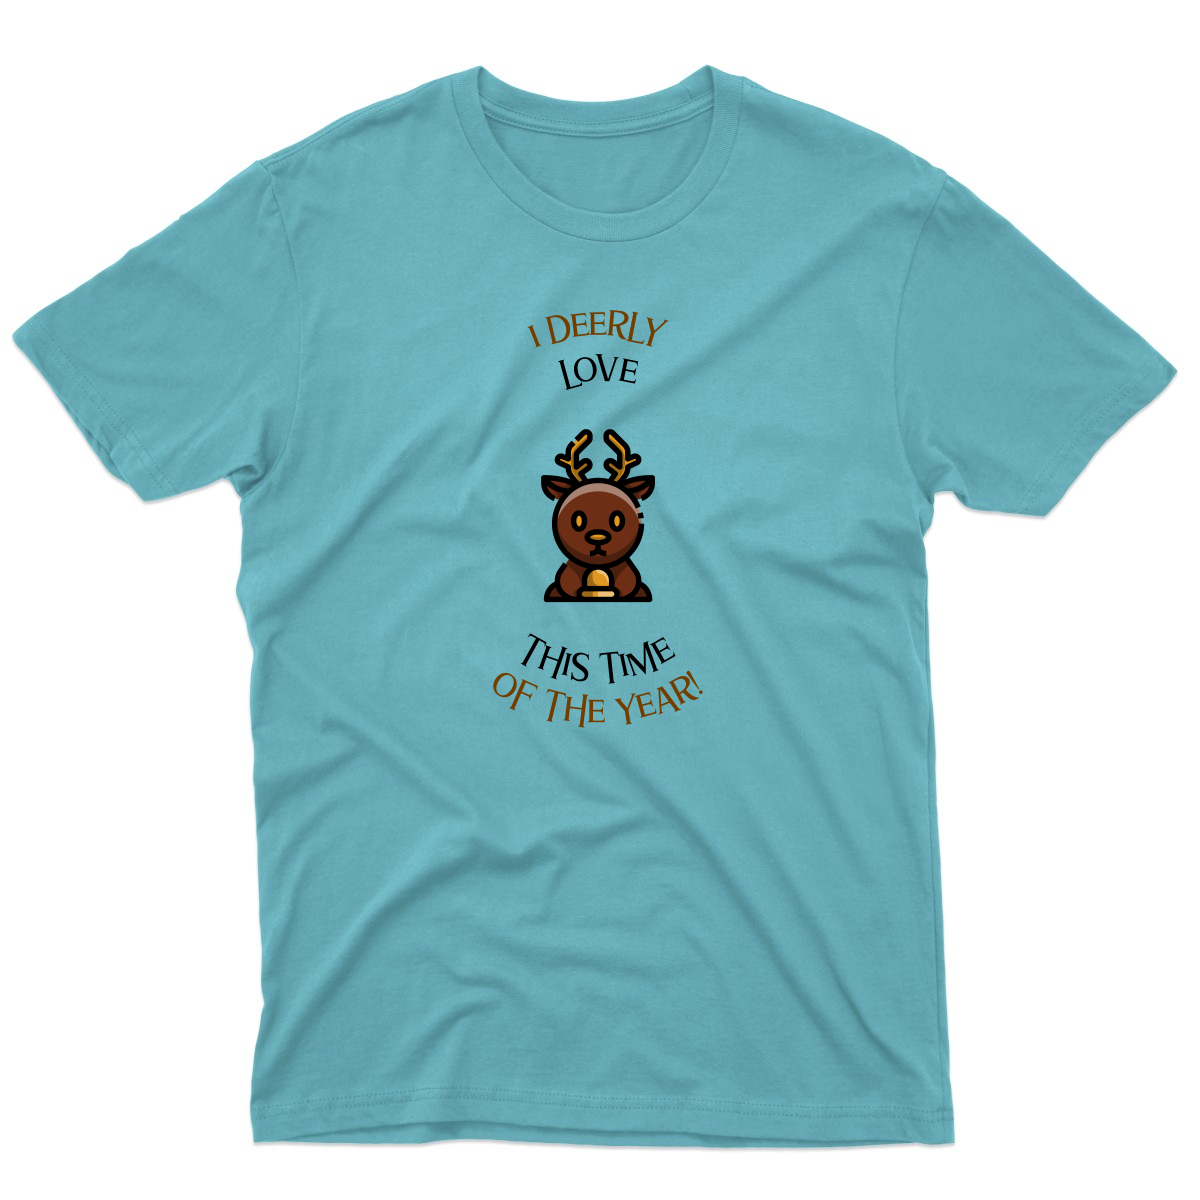 I Deerly Love This Time of the Year! Men's T-shirt | Turquoise